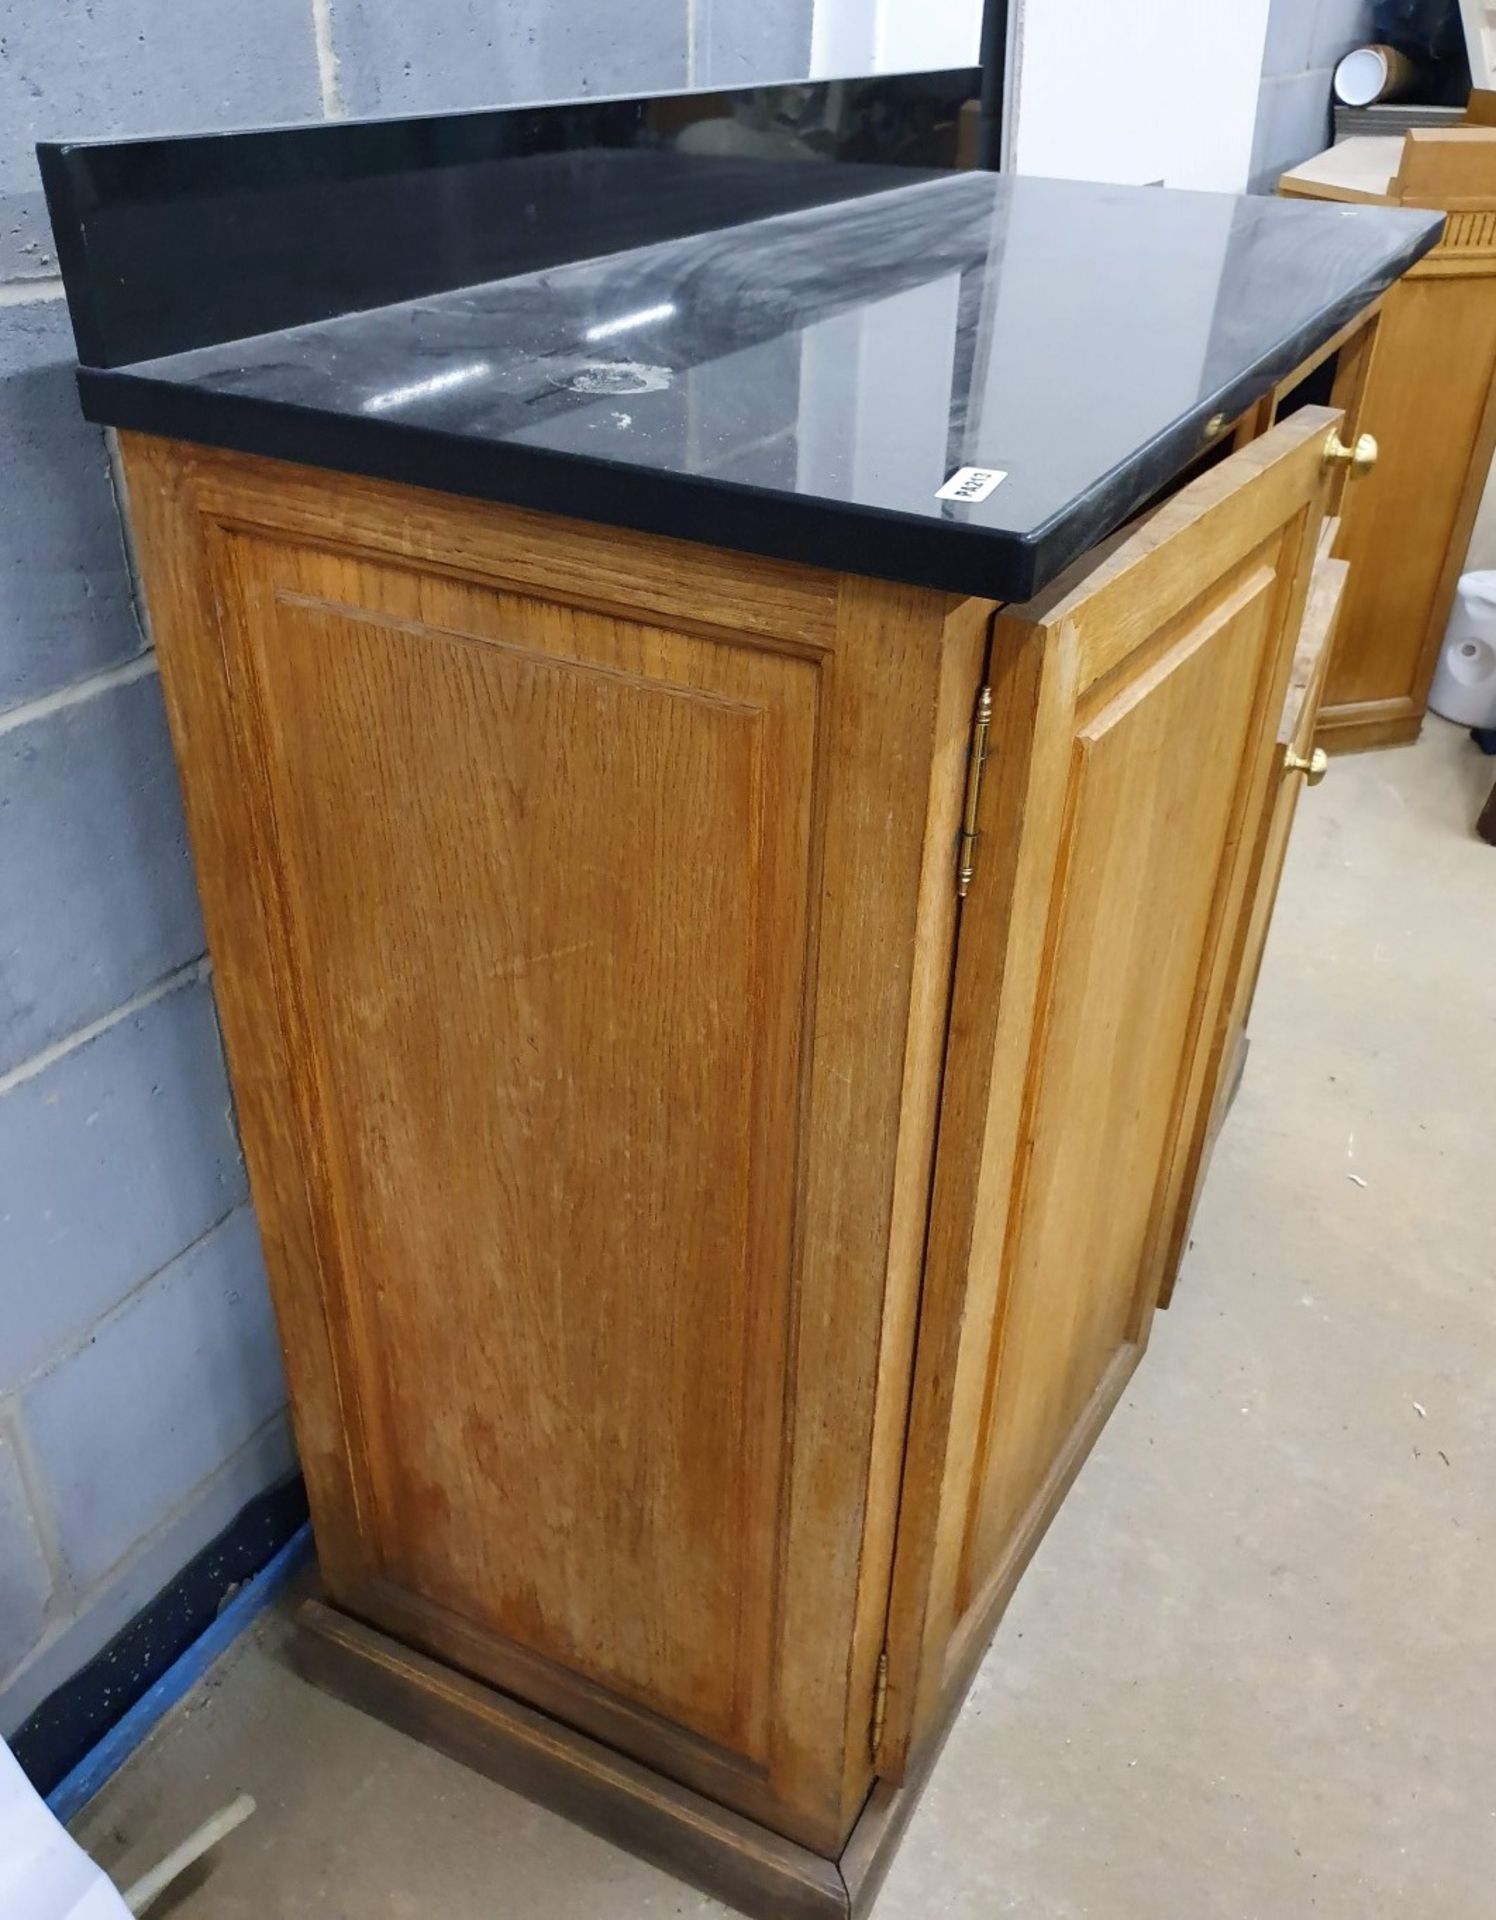 1 x Waitress / Waiter Service Counter With Granite Worktop - H105 x W120 x D51 cms - Ref PA213 - - Image 2 of 5